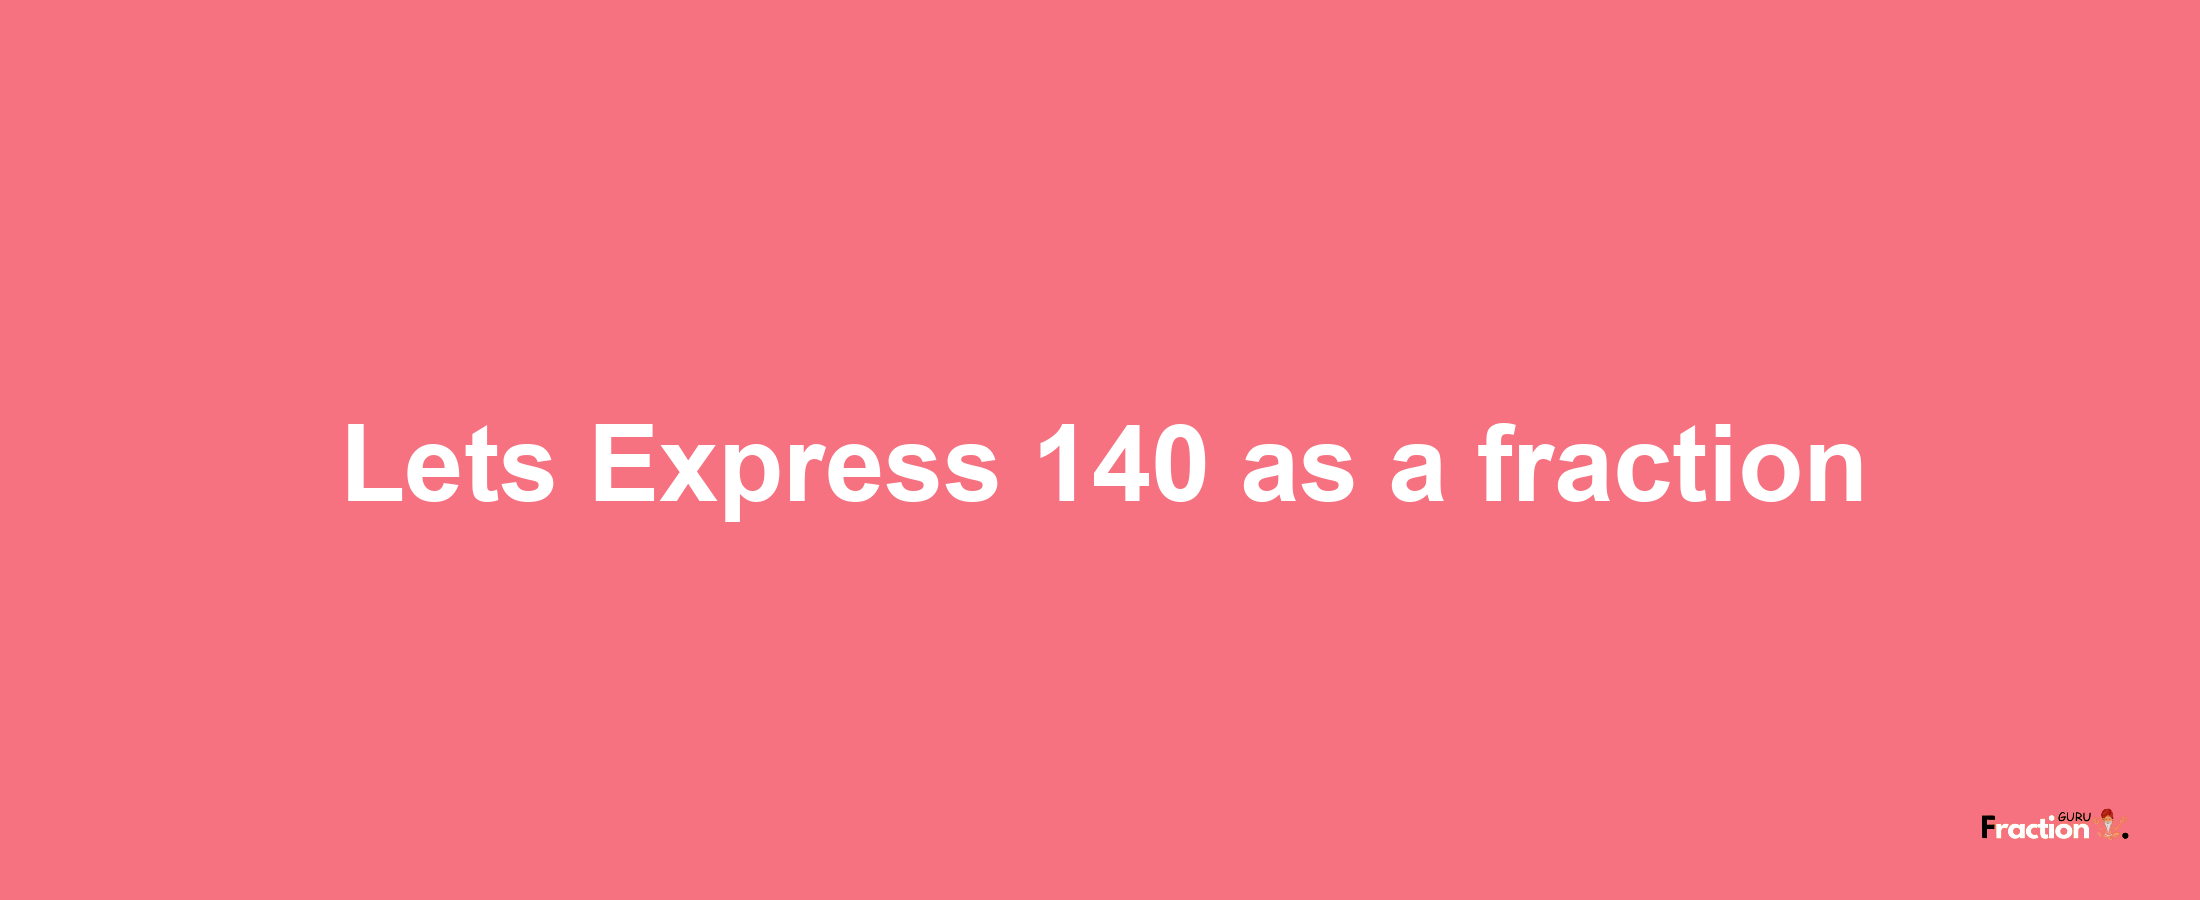 Lets Express 140 as afraction